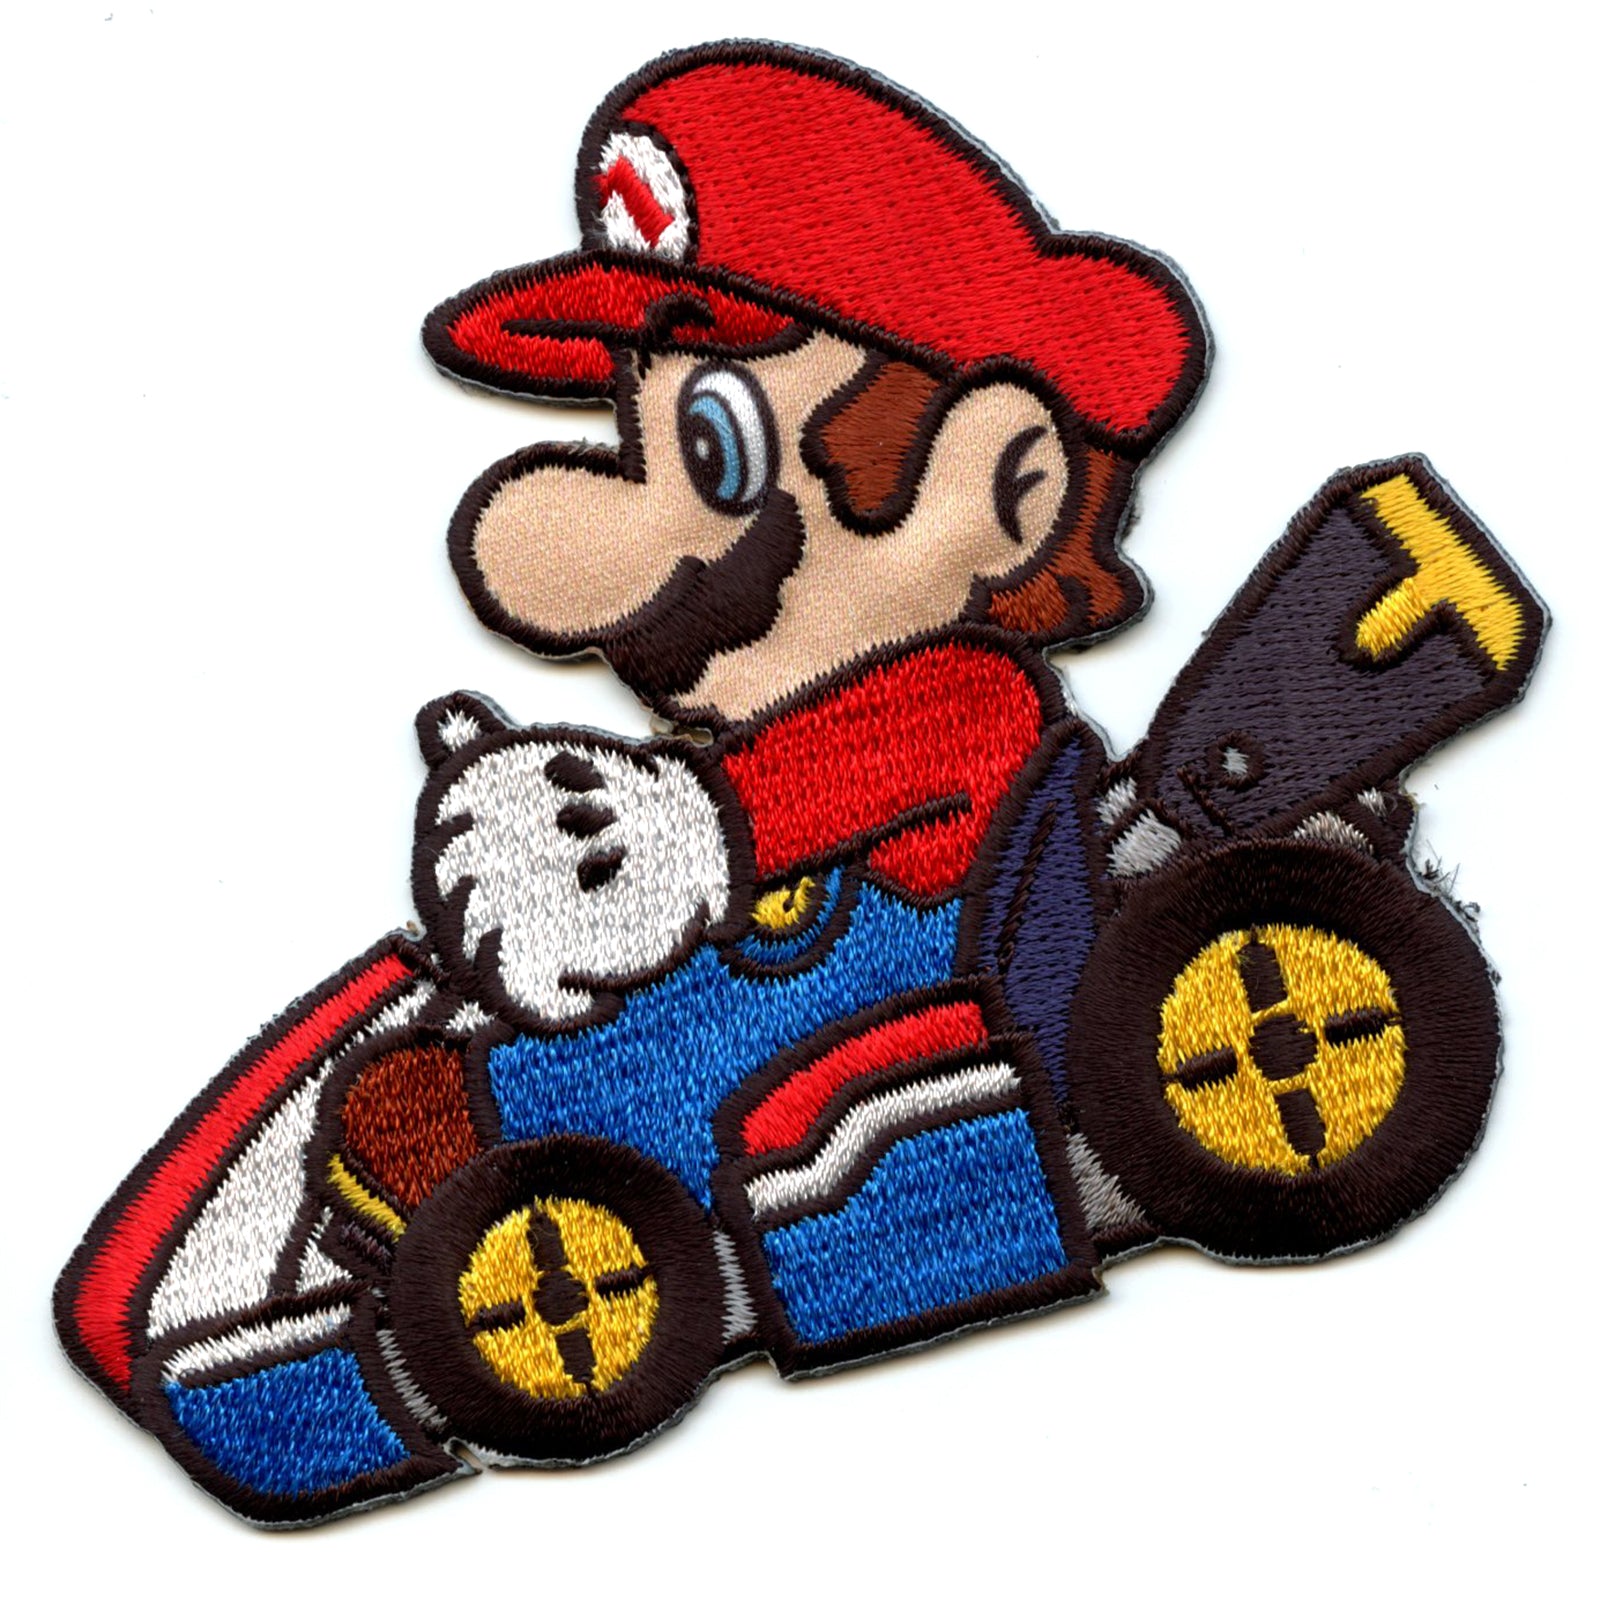 Super Mario Kart Racekart Iron On Patch – Patch Collection